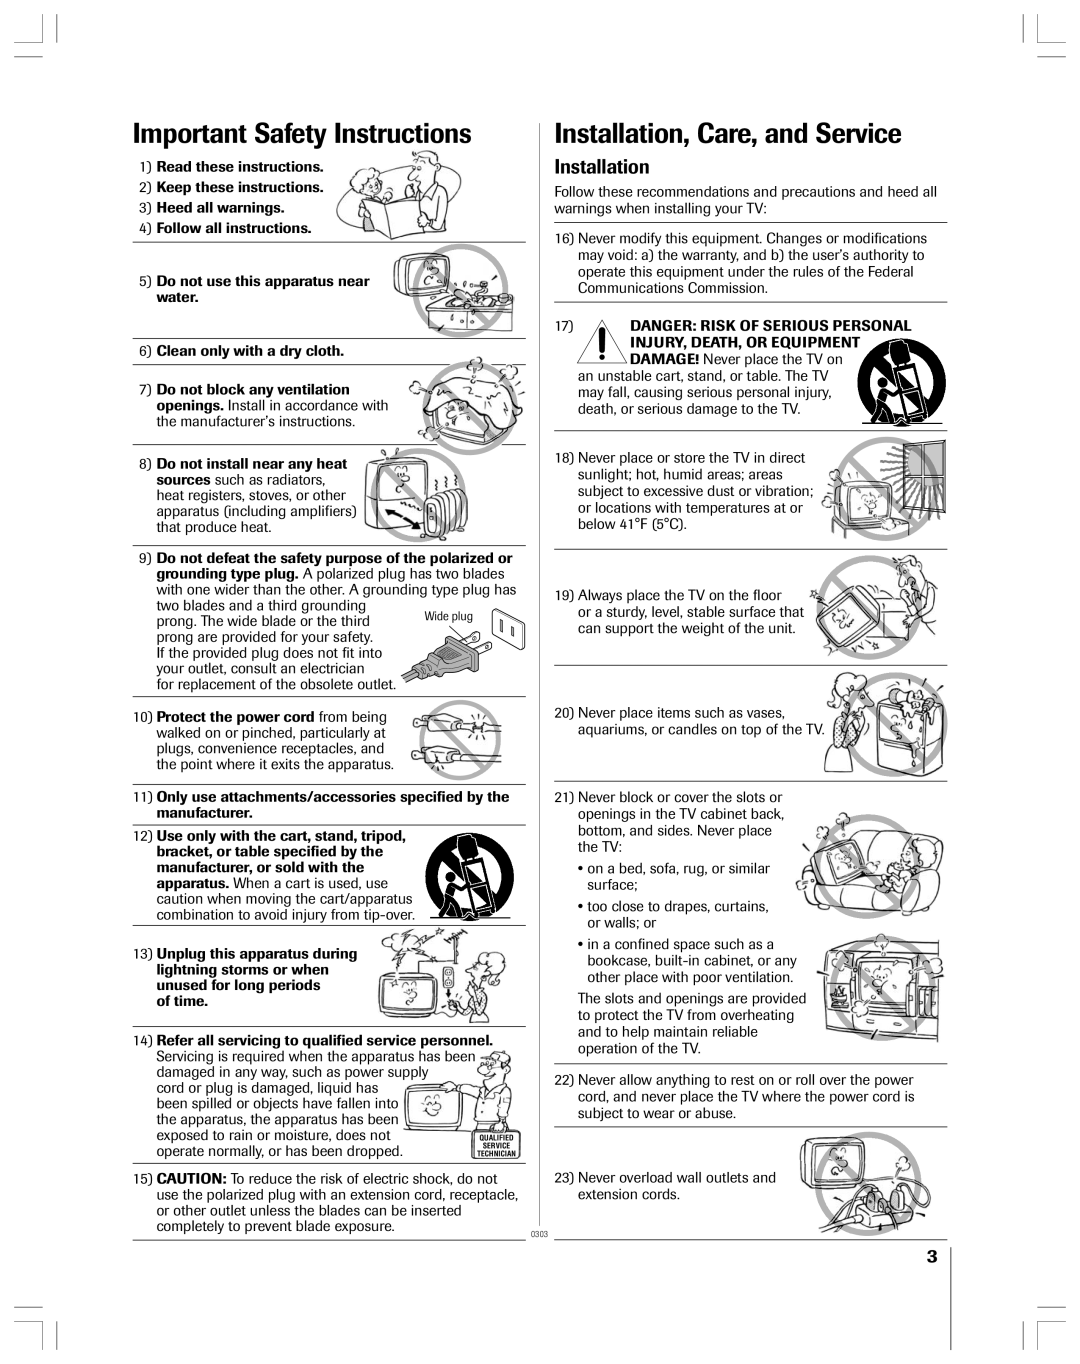 Toshiba 51HX93 Important Safety Instructions, Installation, Care, and Service, exposed to rain or moisture, does not 